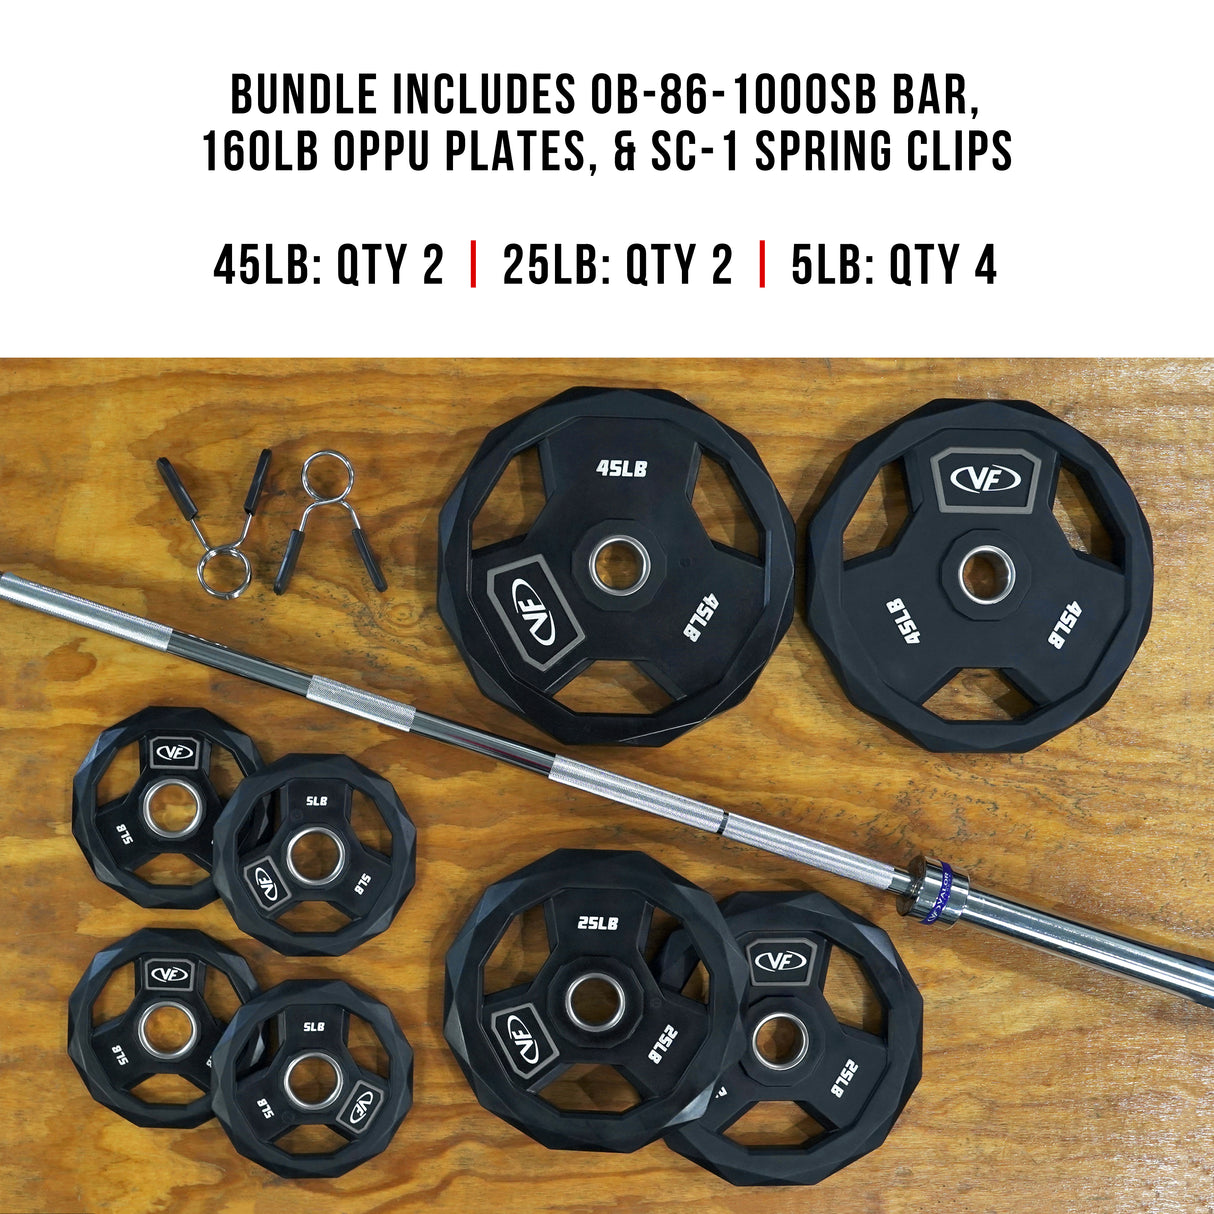 Bench Press Bundle w/ Barbell and Olympic Plates